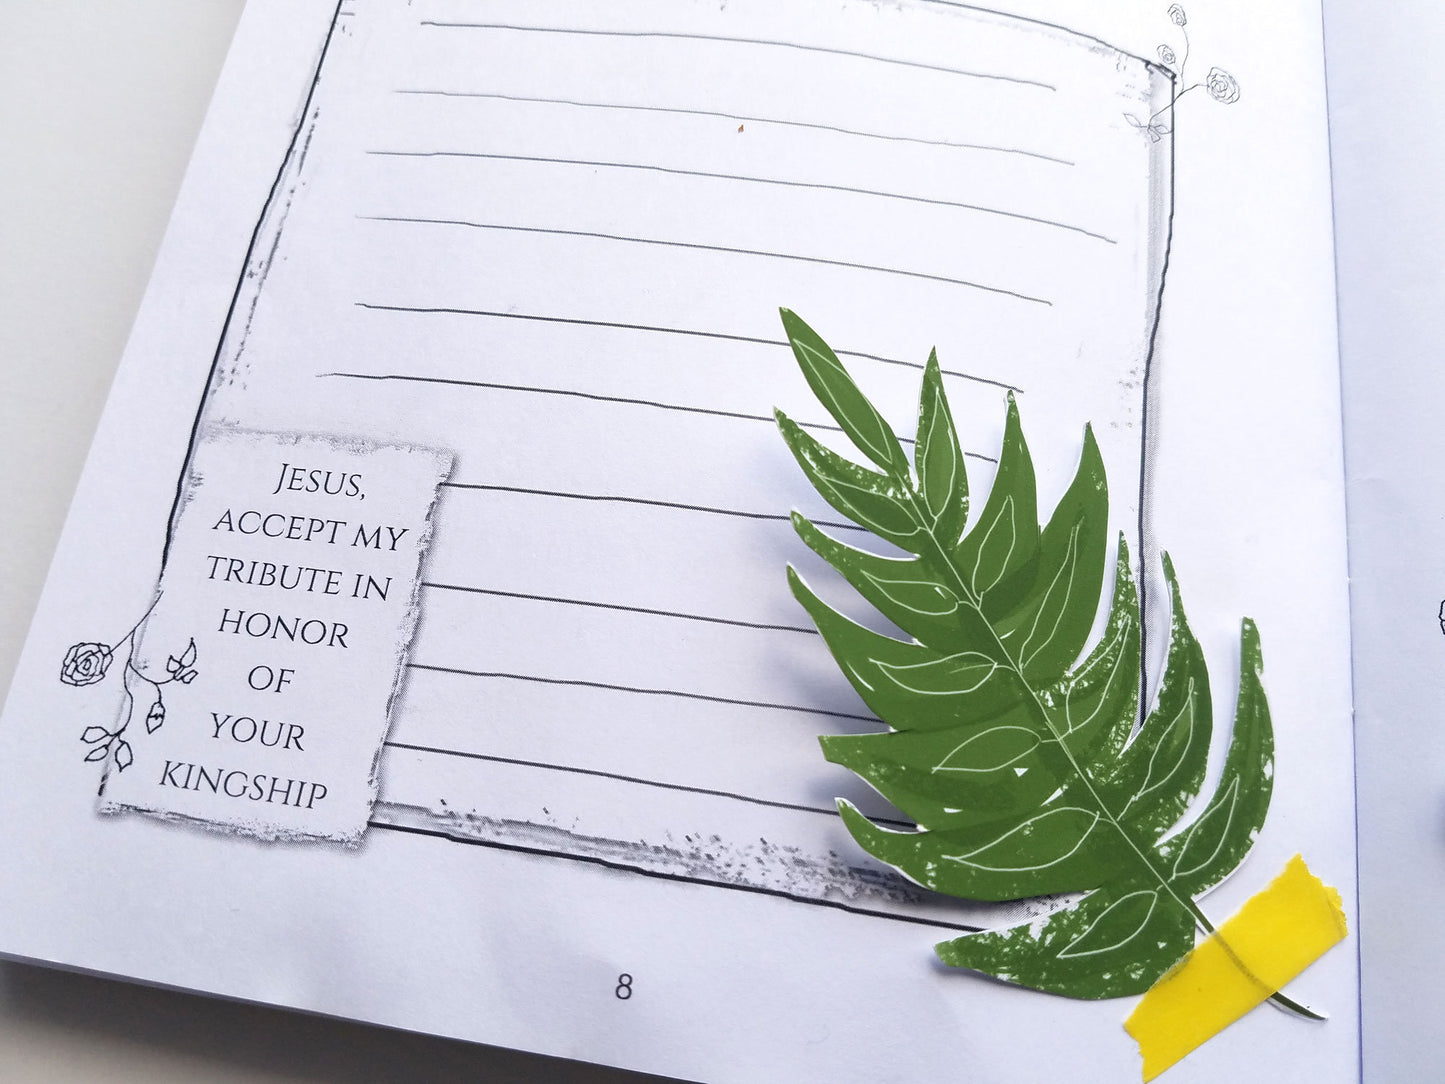 Palm leaves Illustrations - digital download for bible journaling, card making and craft